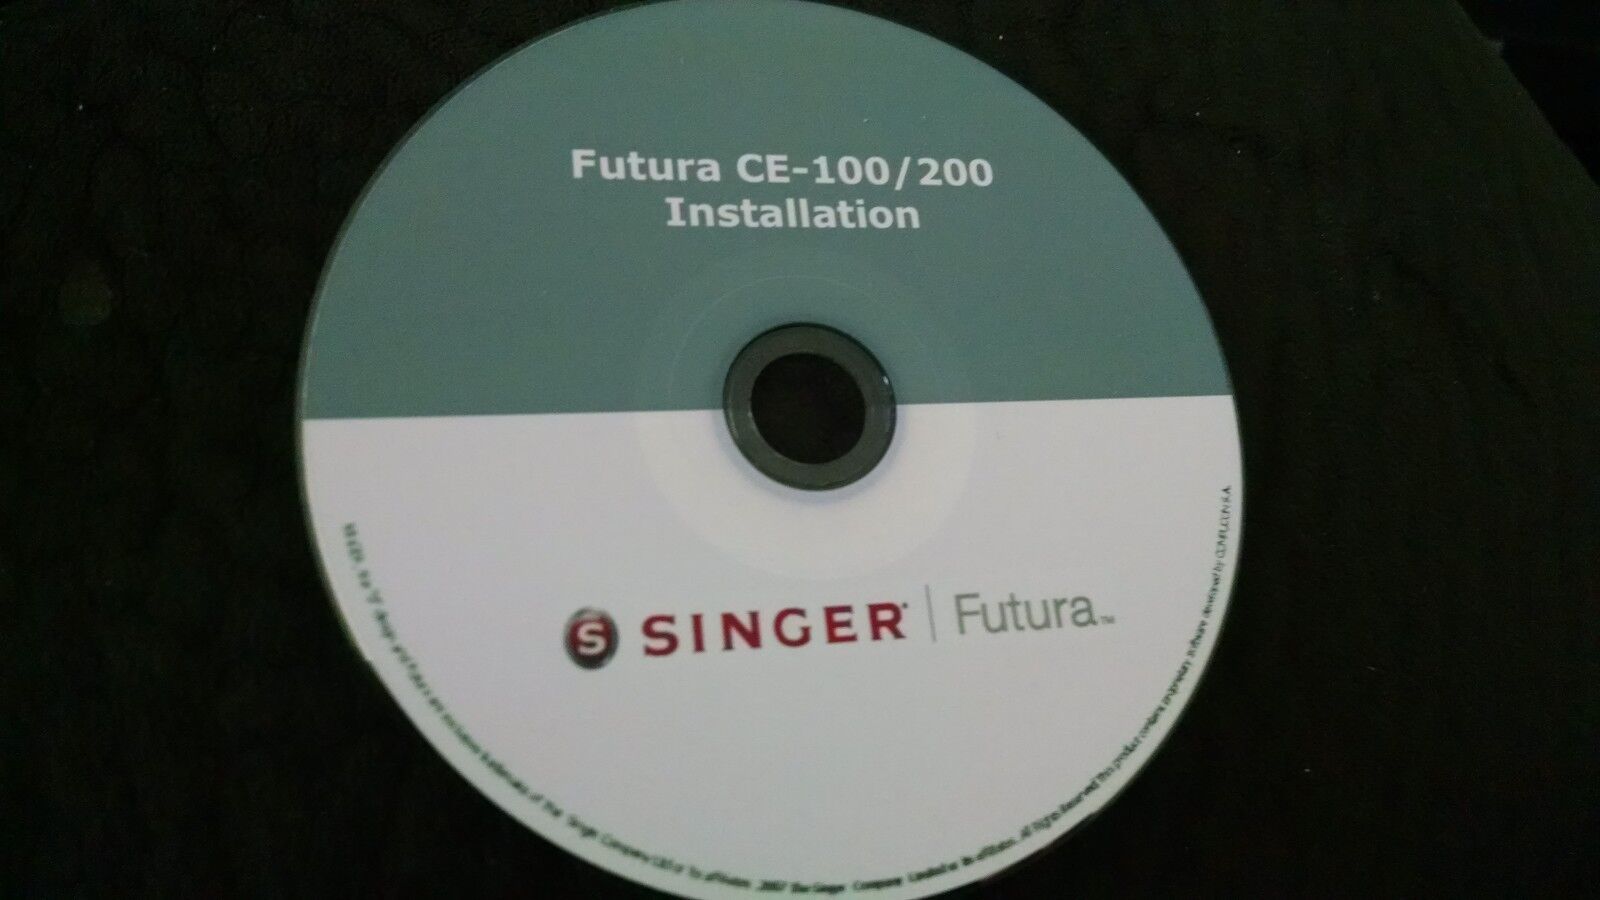 Singer Futura Installation Software for the CE 100/200 and Upgrade 2.5